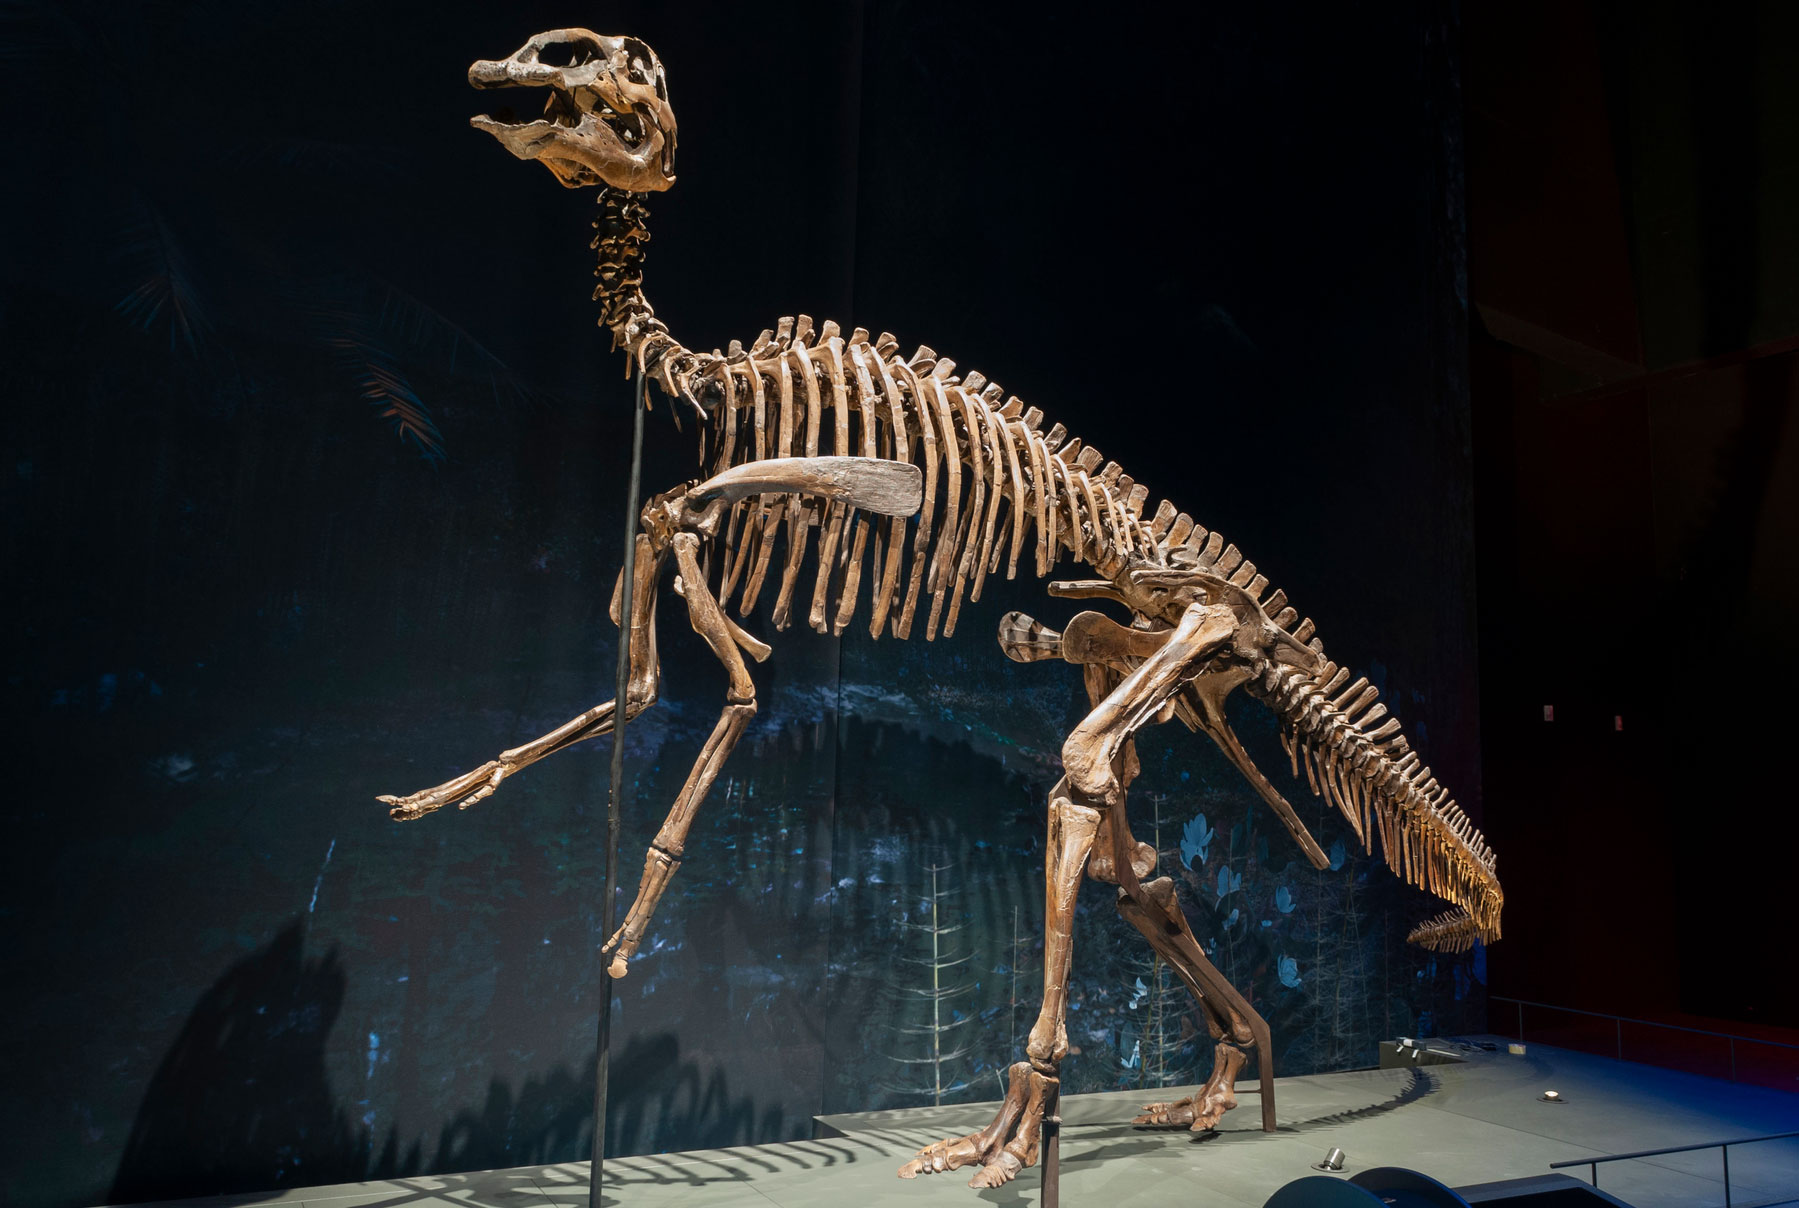 Photograph of an Edmontosaurus specimen from the Cretaceous of South Dakota on display in a museum. The photo shows an animal rearing up on its longer hind legs, with its shorter front legs not touching the ground. The animal's neck is elongated, and the skull has a bill-like snout. The tail is long and held off the ground.